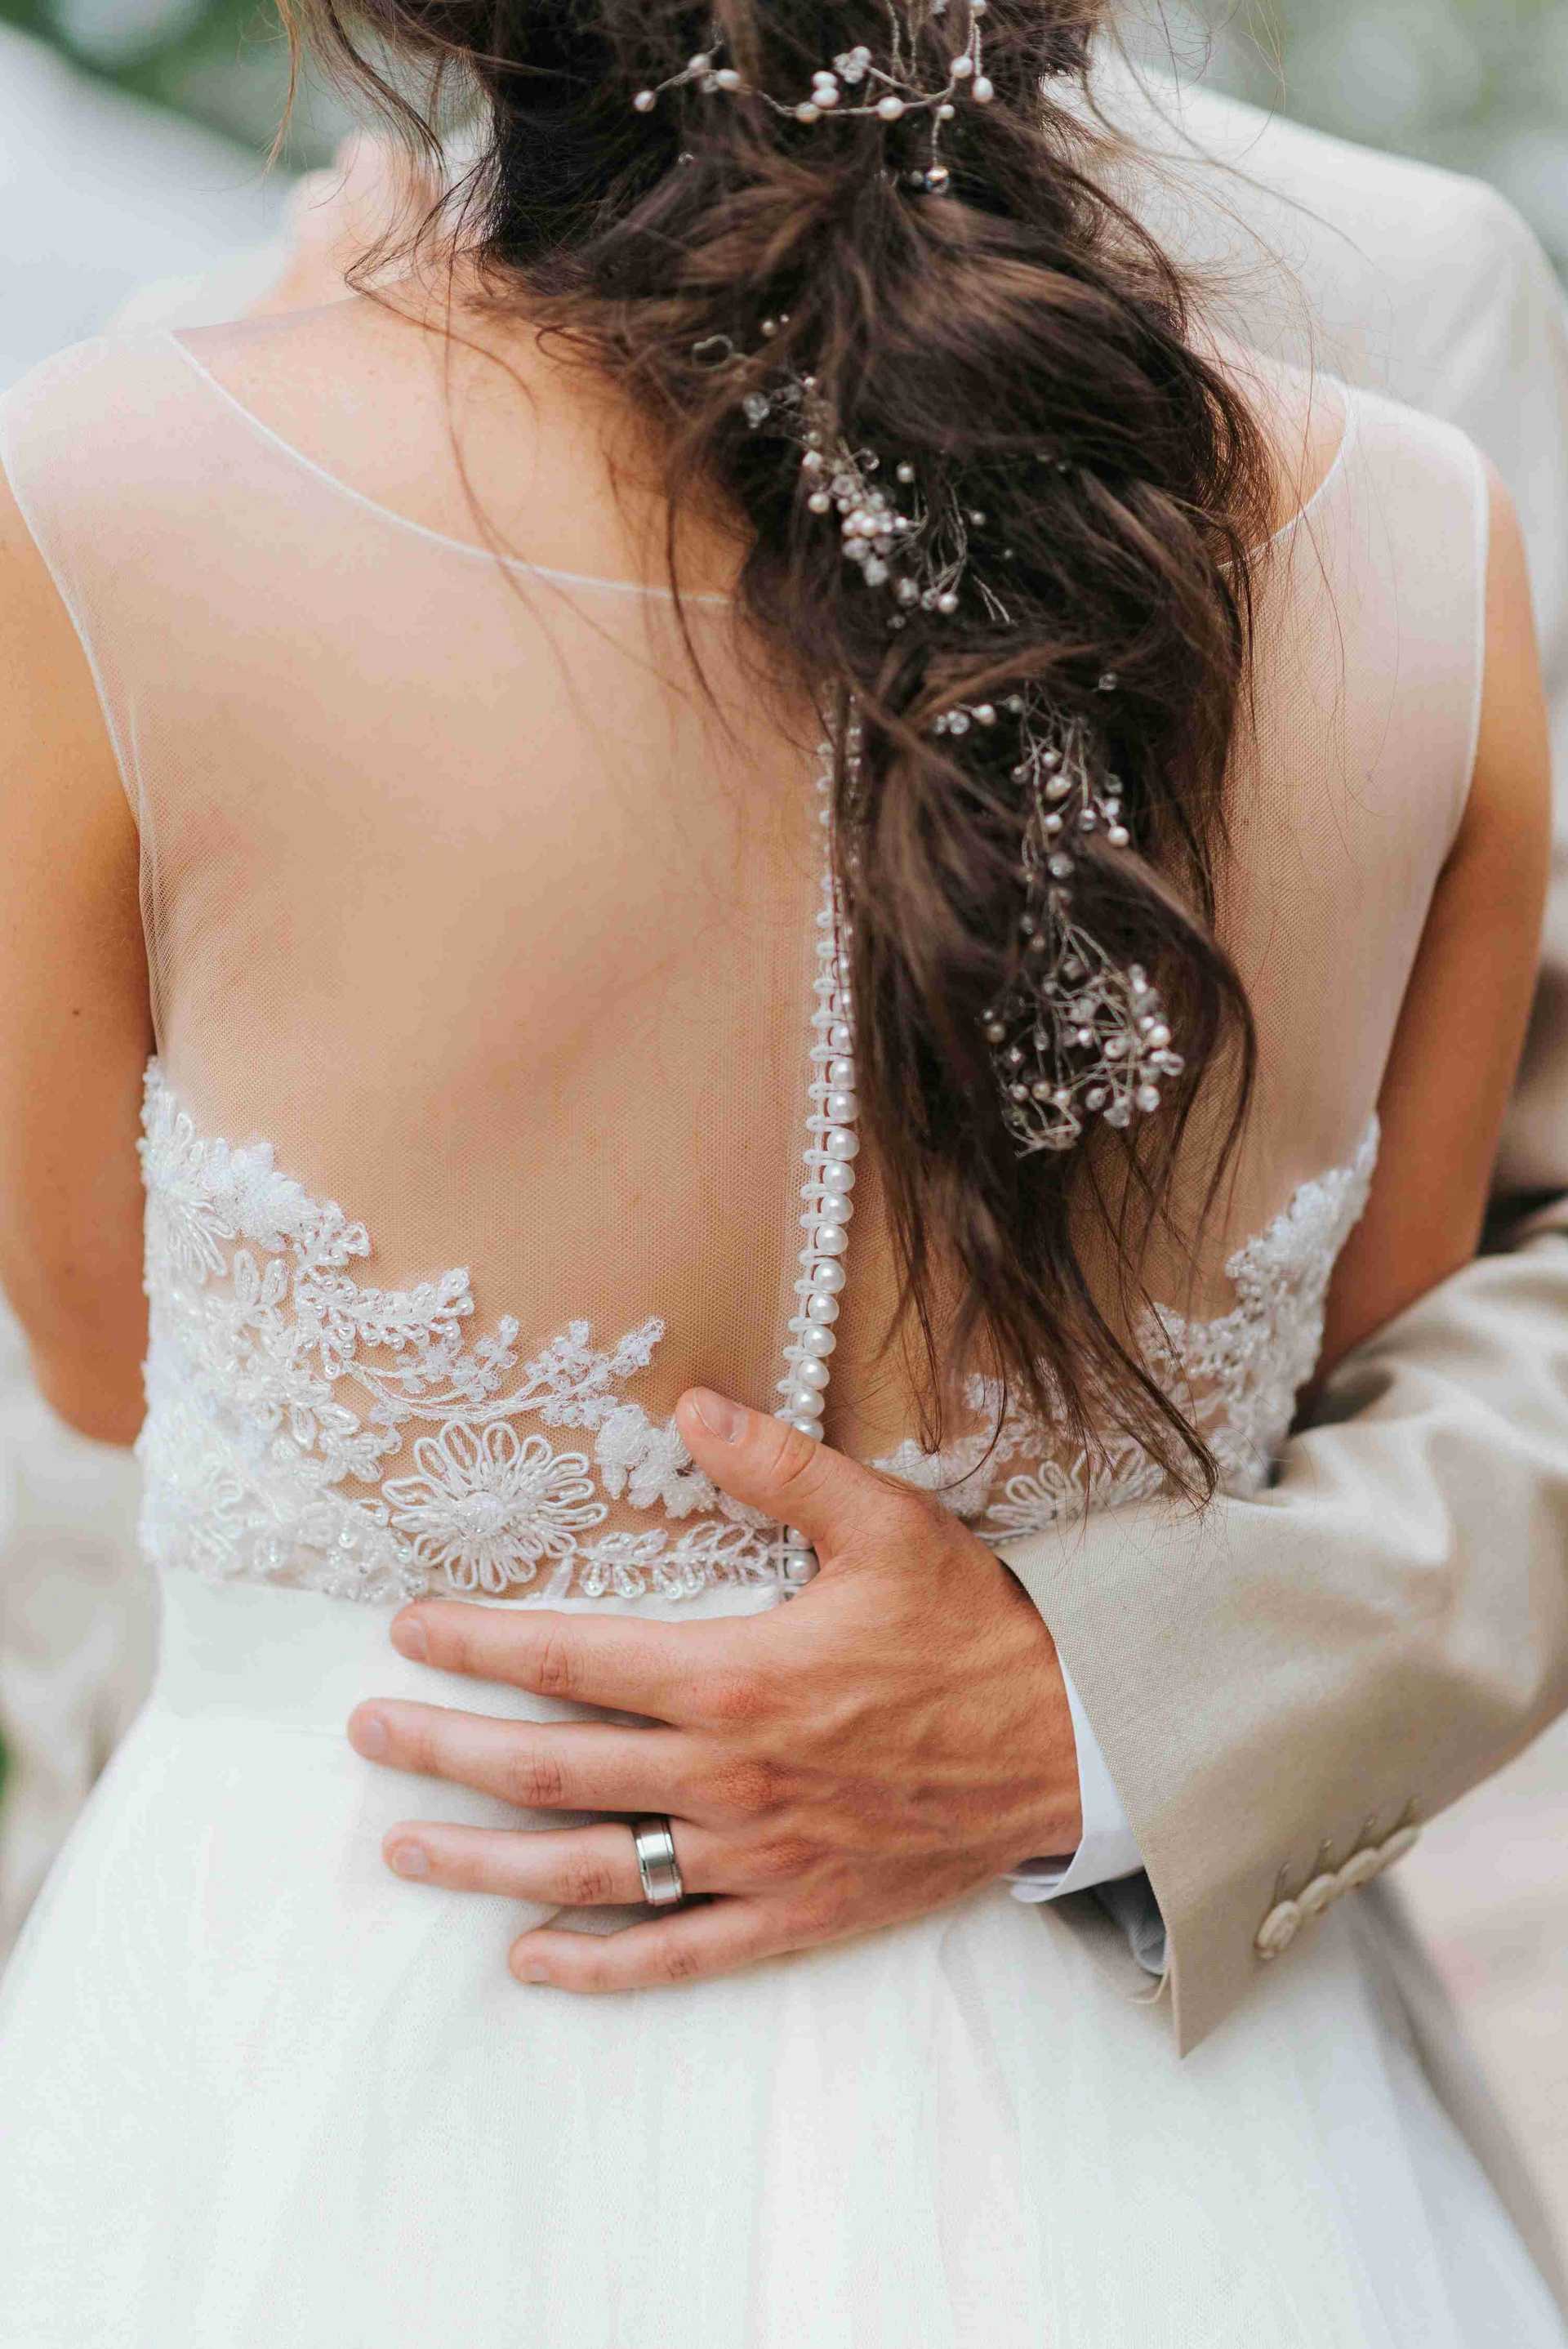 A bride wearing a wedding dress with lace details and a hair accessory.